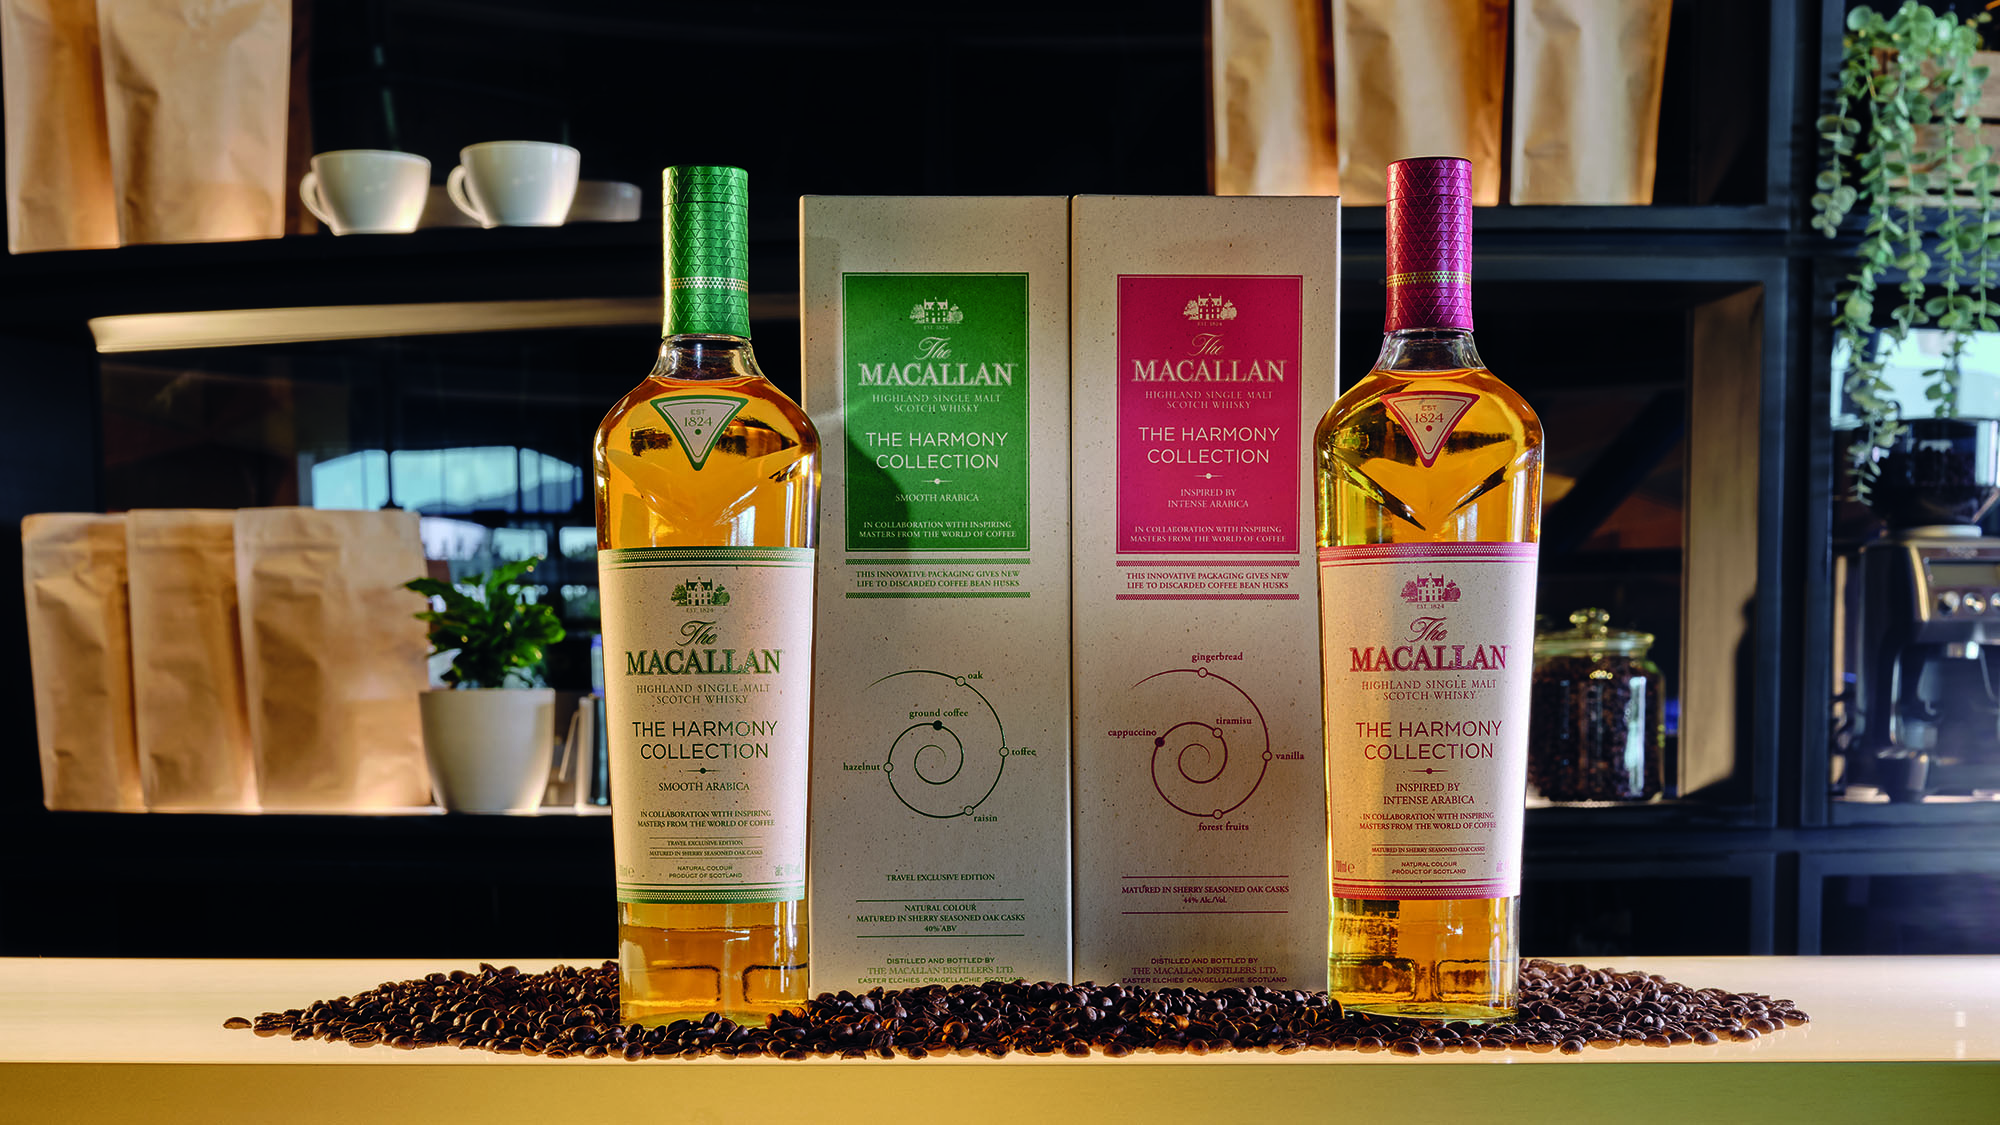 The Macallan Harmony Collection Inspired by Intense Arabica and Smooth Arabica